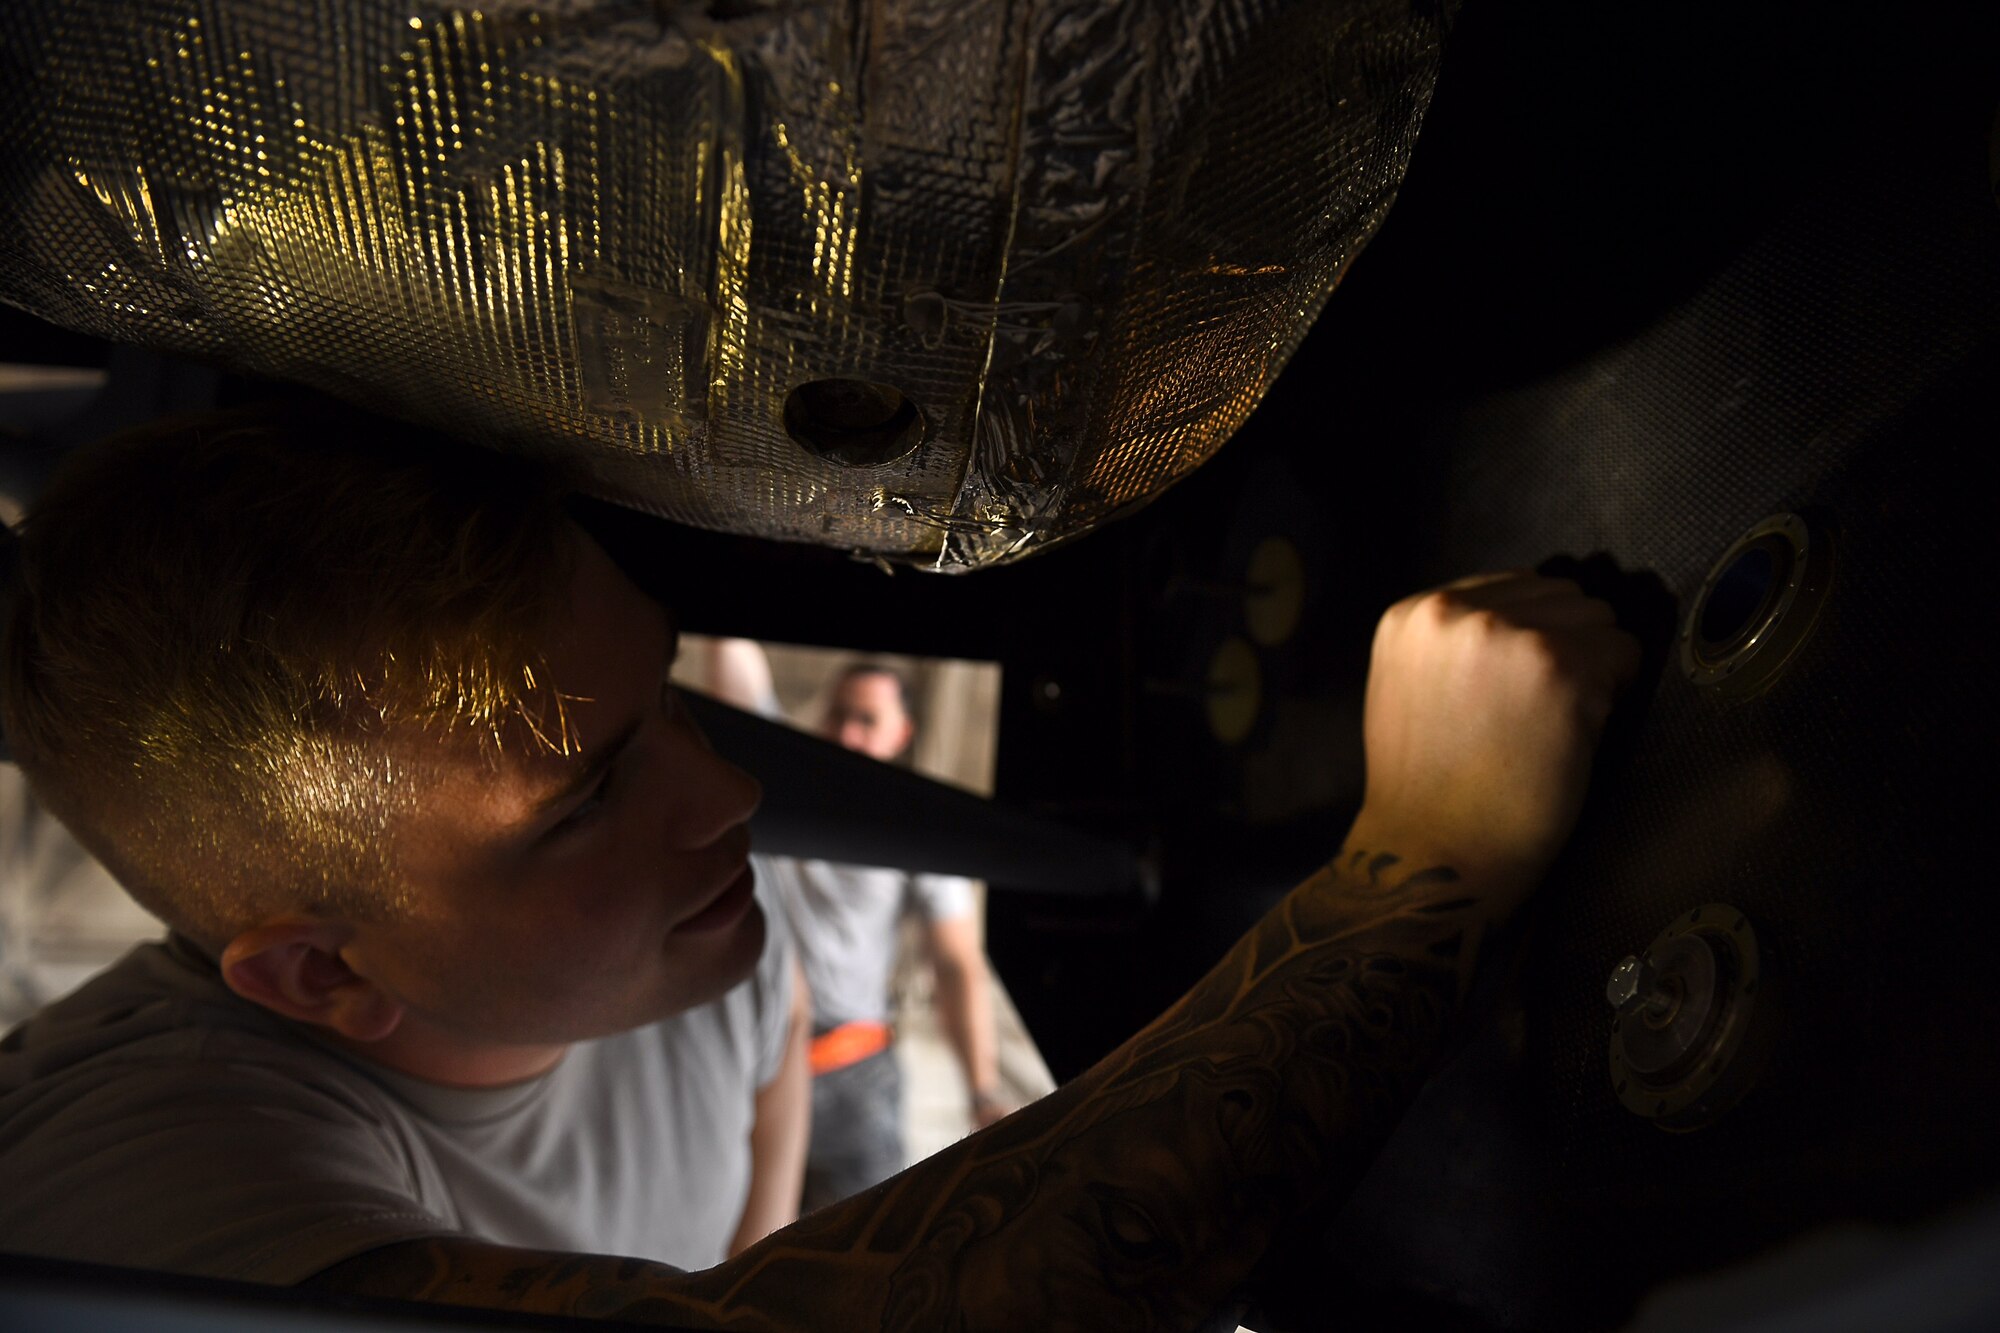 Airman 1st Class Conner, crew chief assigned to the 432nd Maintenance Group, inspects the inside of an MQ-9 Reaper model fuselage August 24, 2017, at Dover Air Force Base, Del.